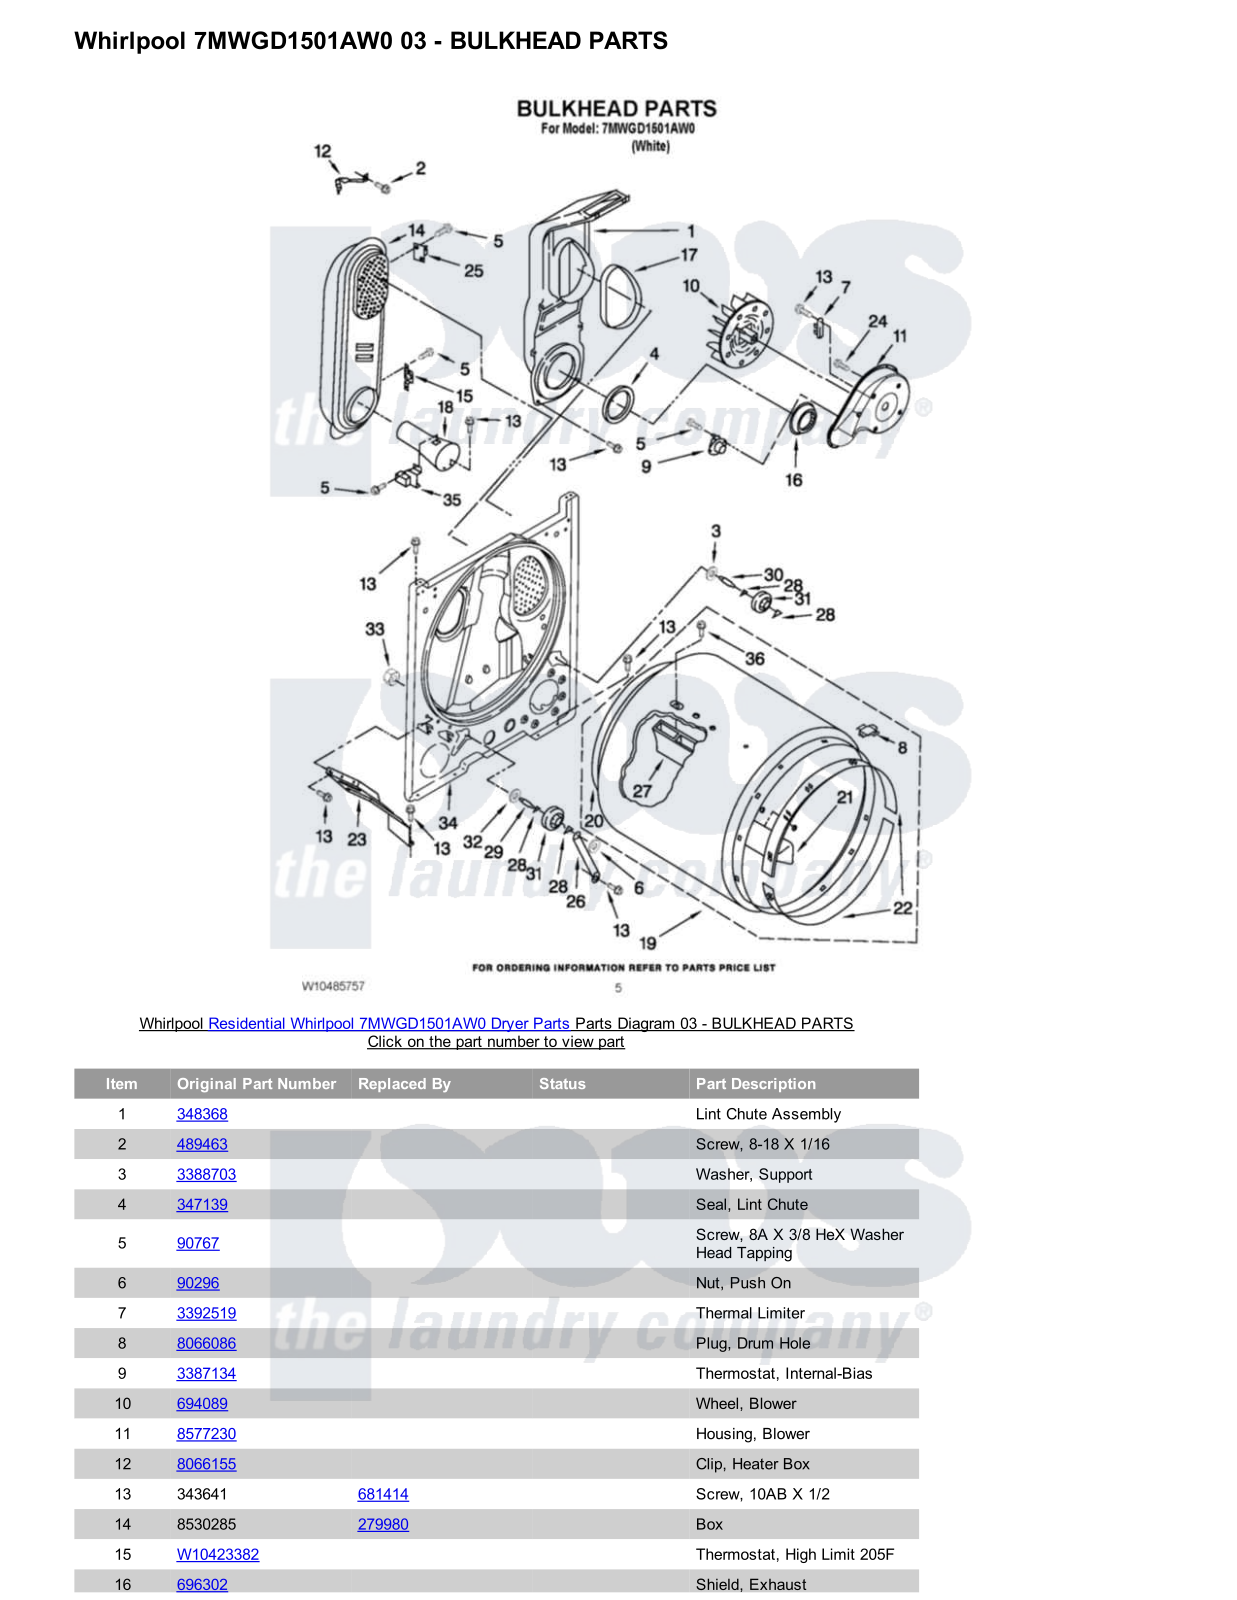 Whirlpool 7MWGD1501AW0 Parts Diagram